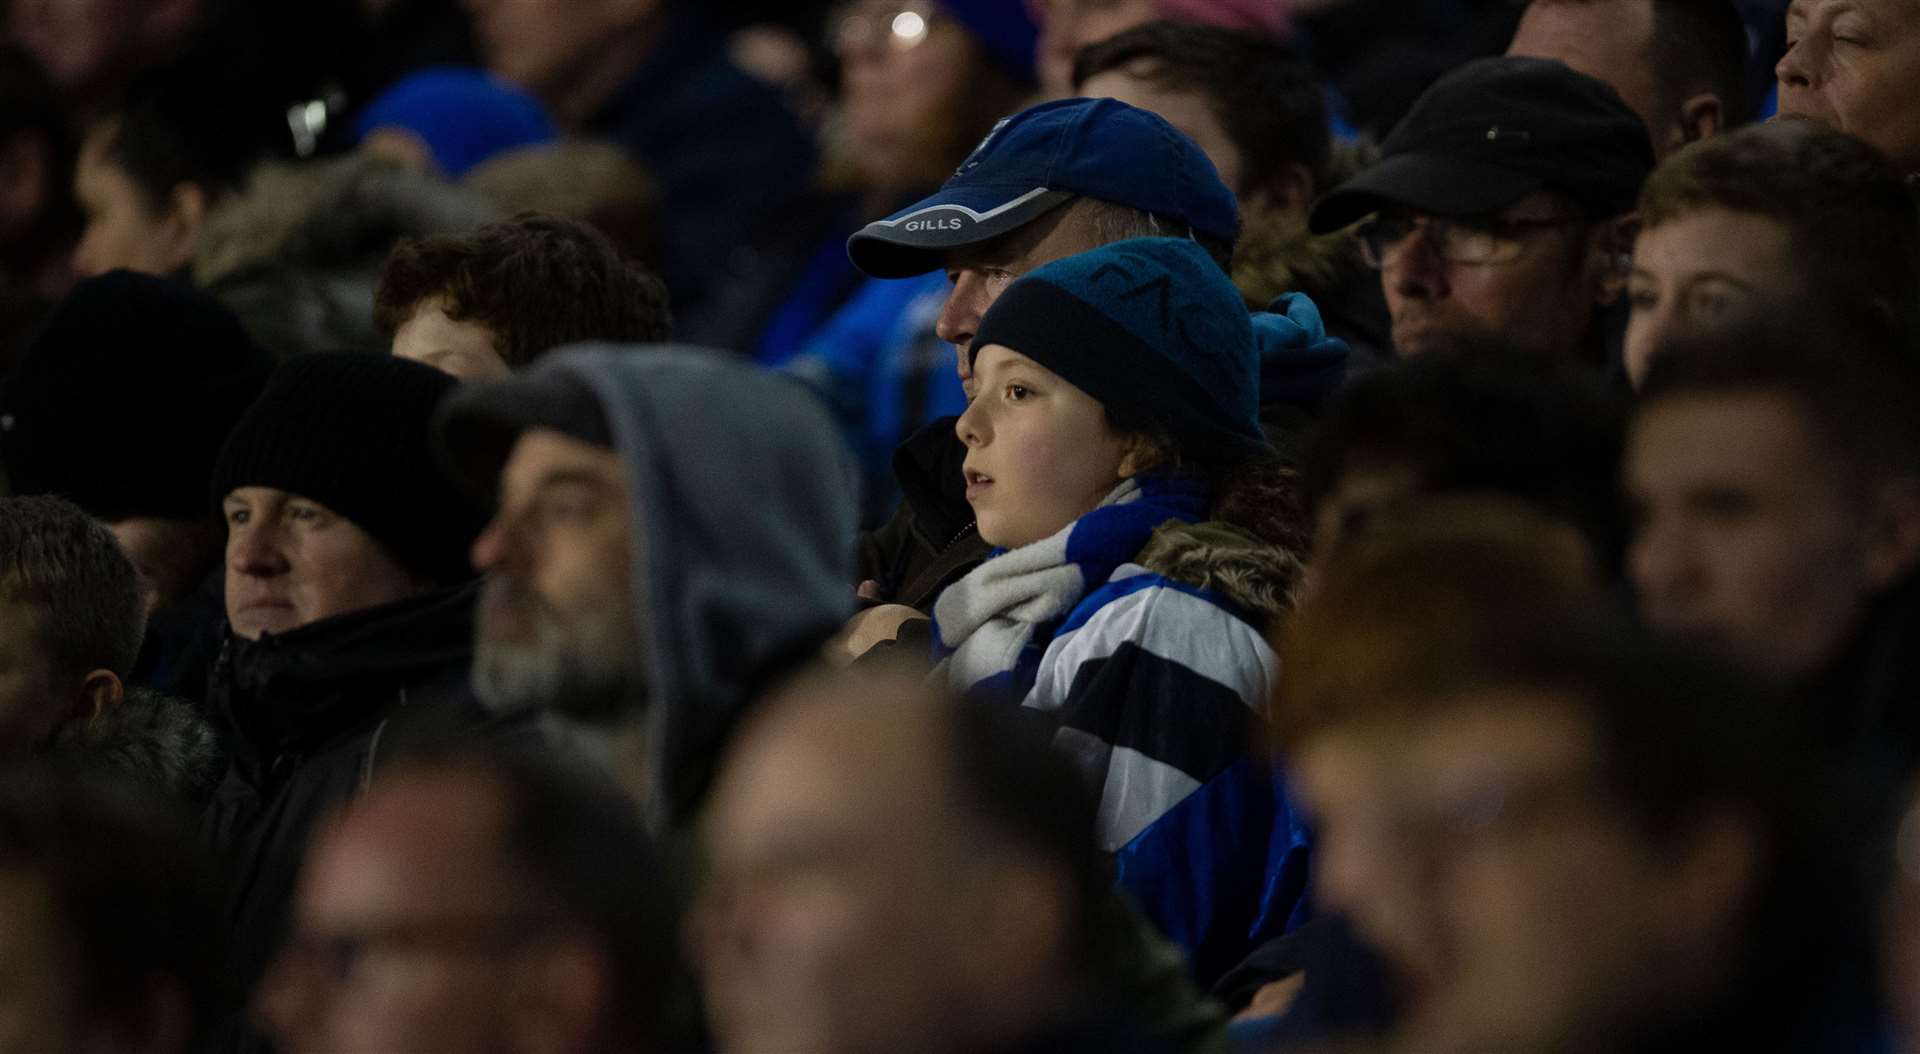 Under-14s can watch the Gills for free next season